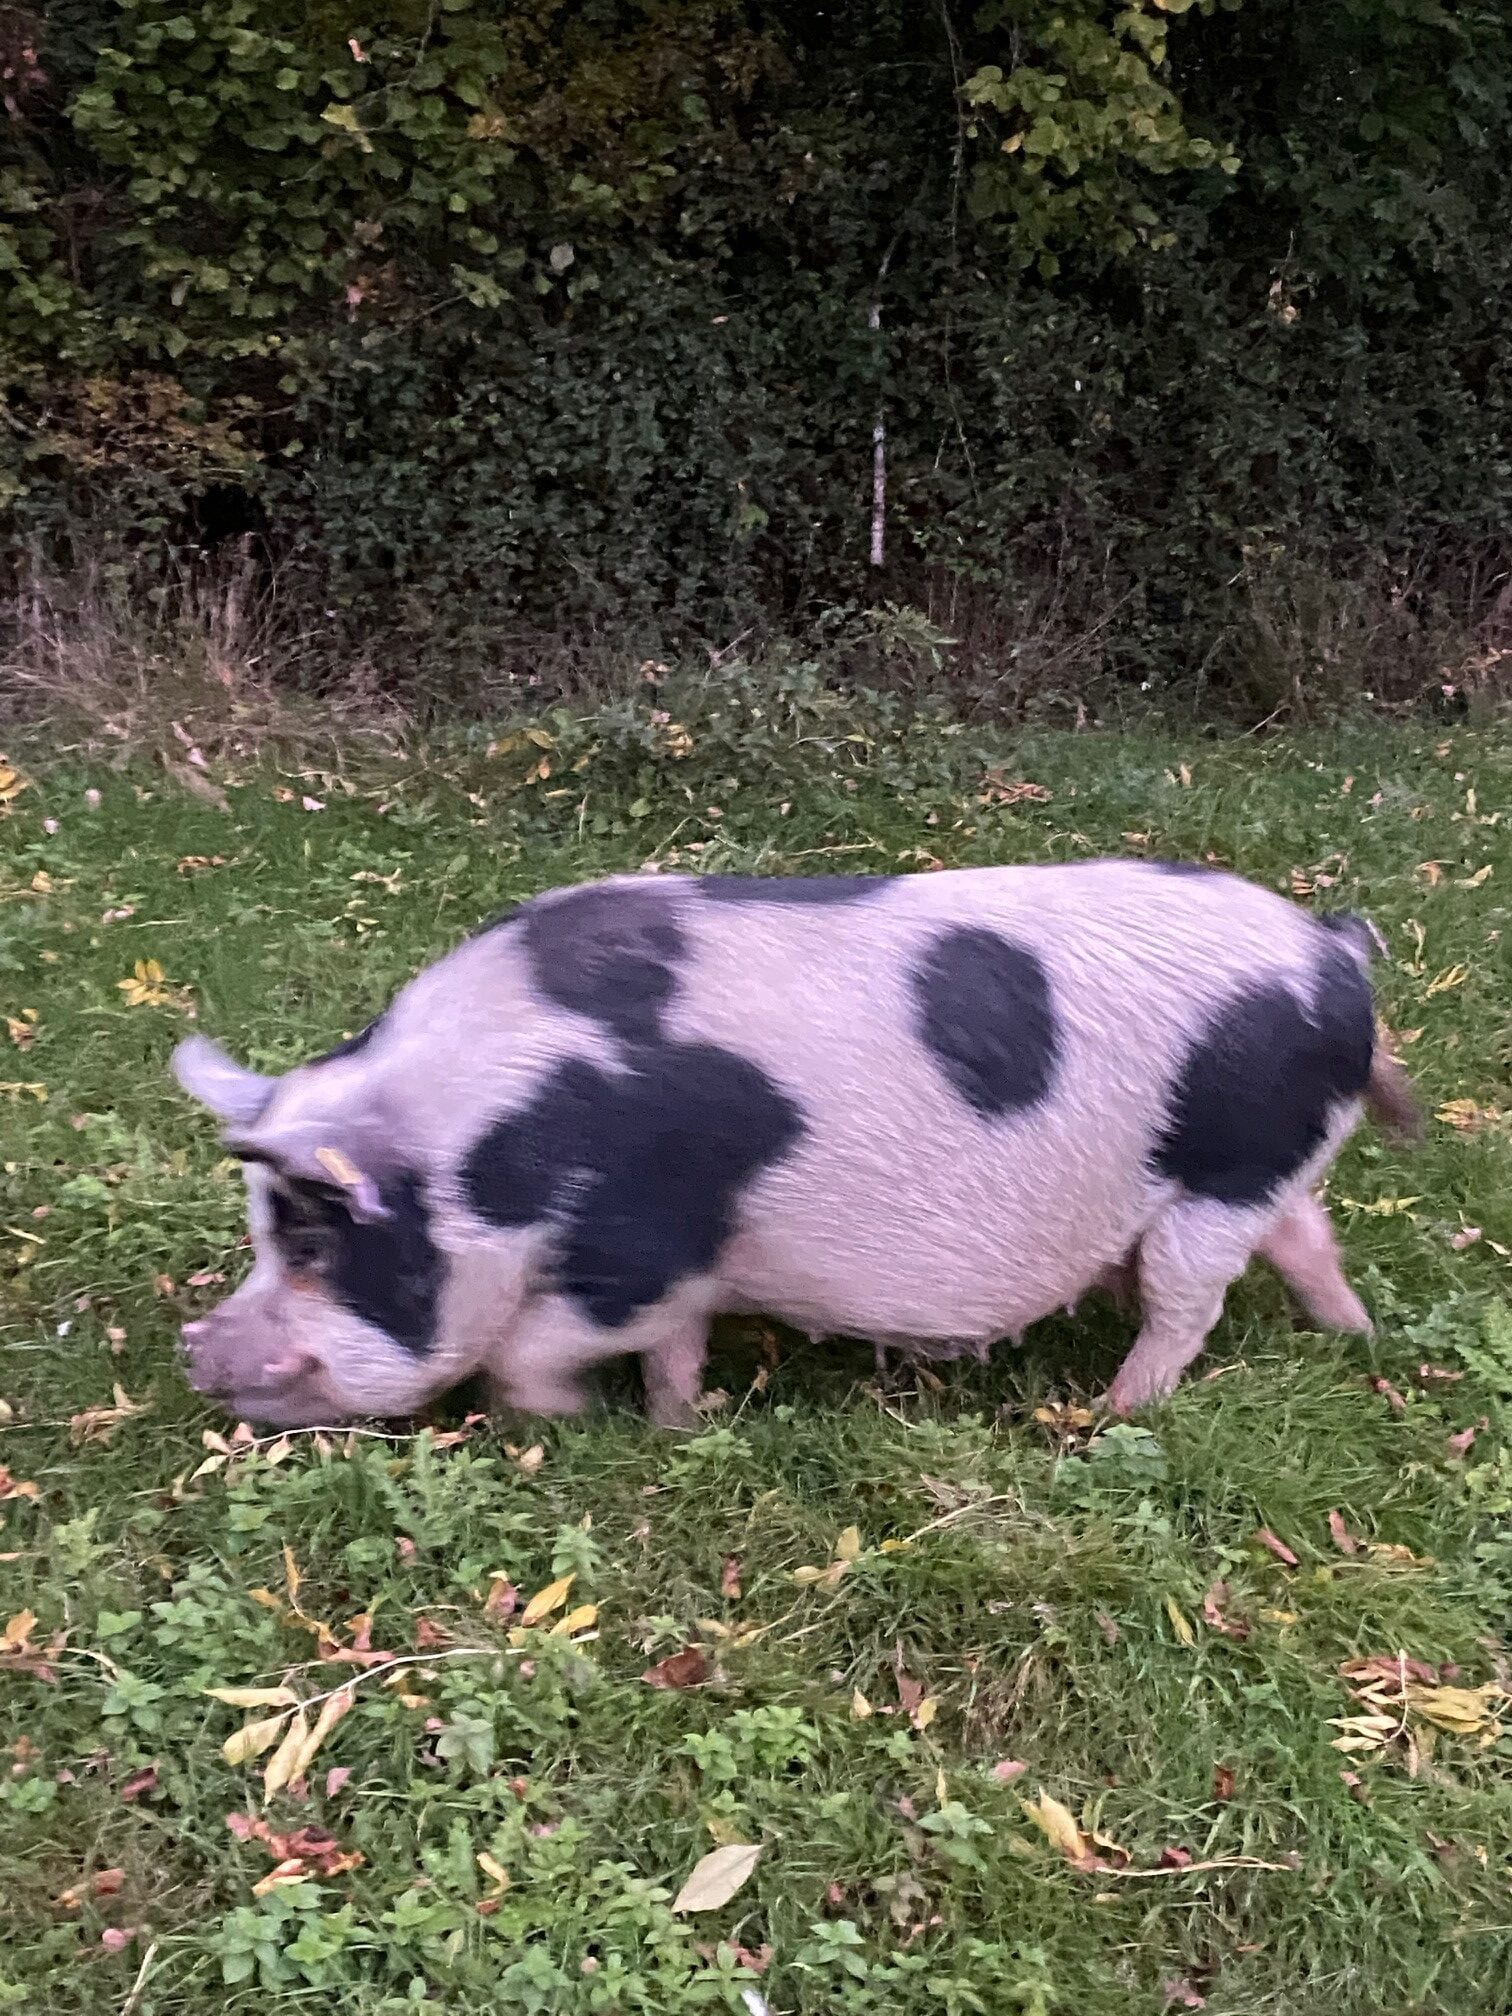 Spotty pig roaming the New Forest eating acorns